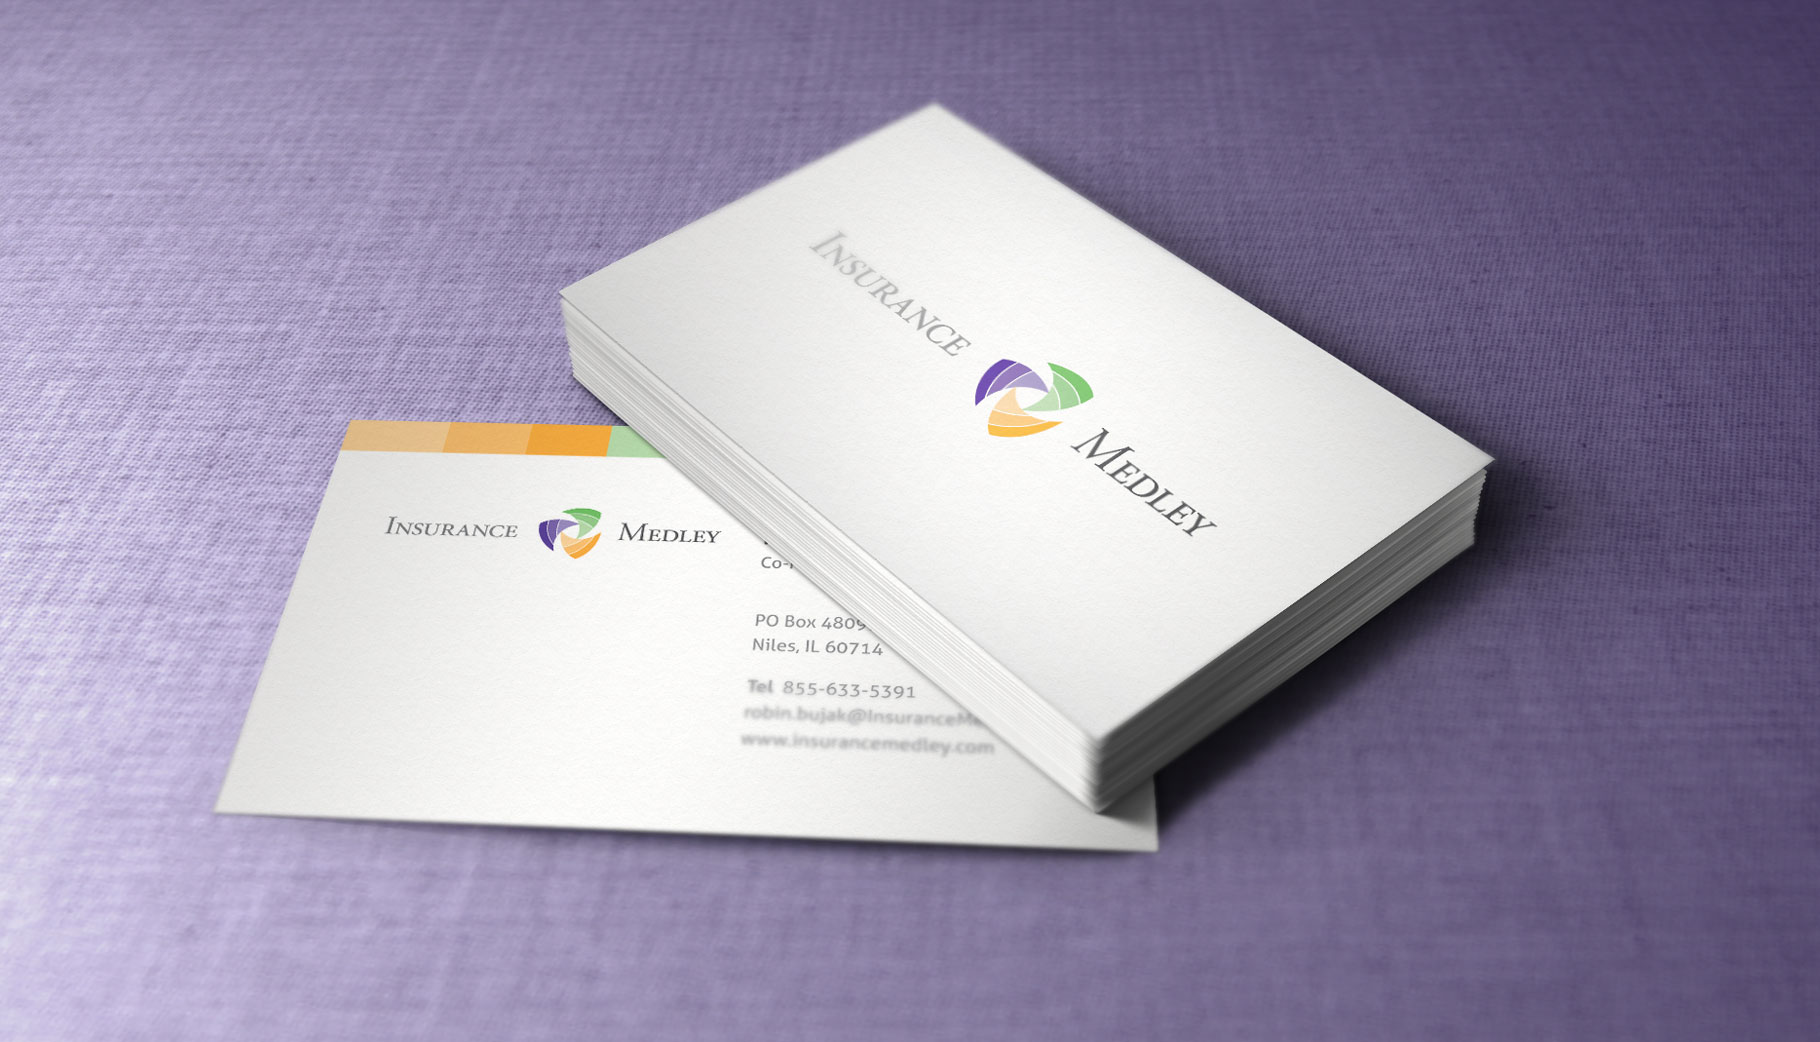 Insurance Medley Business Cards